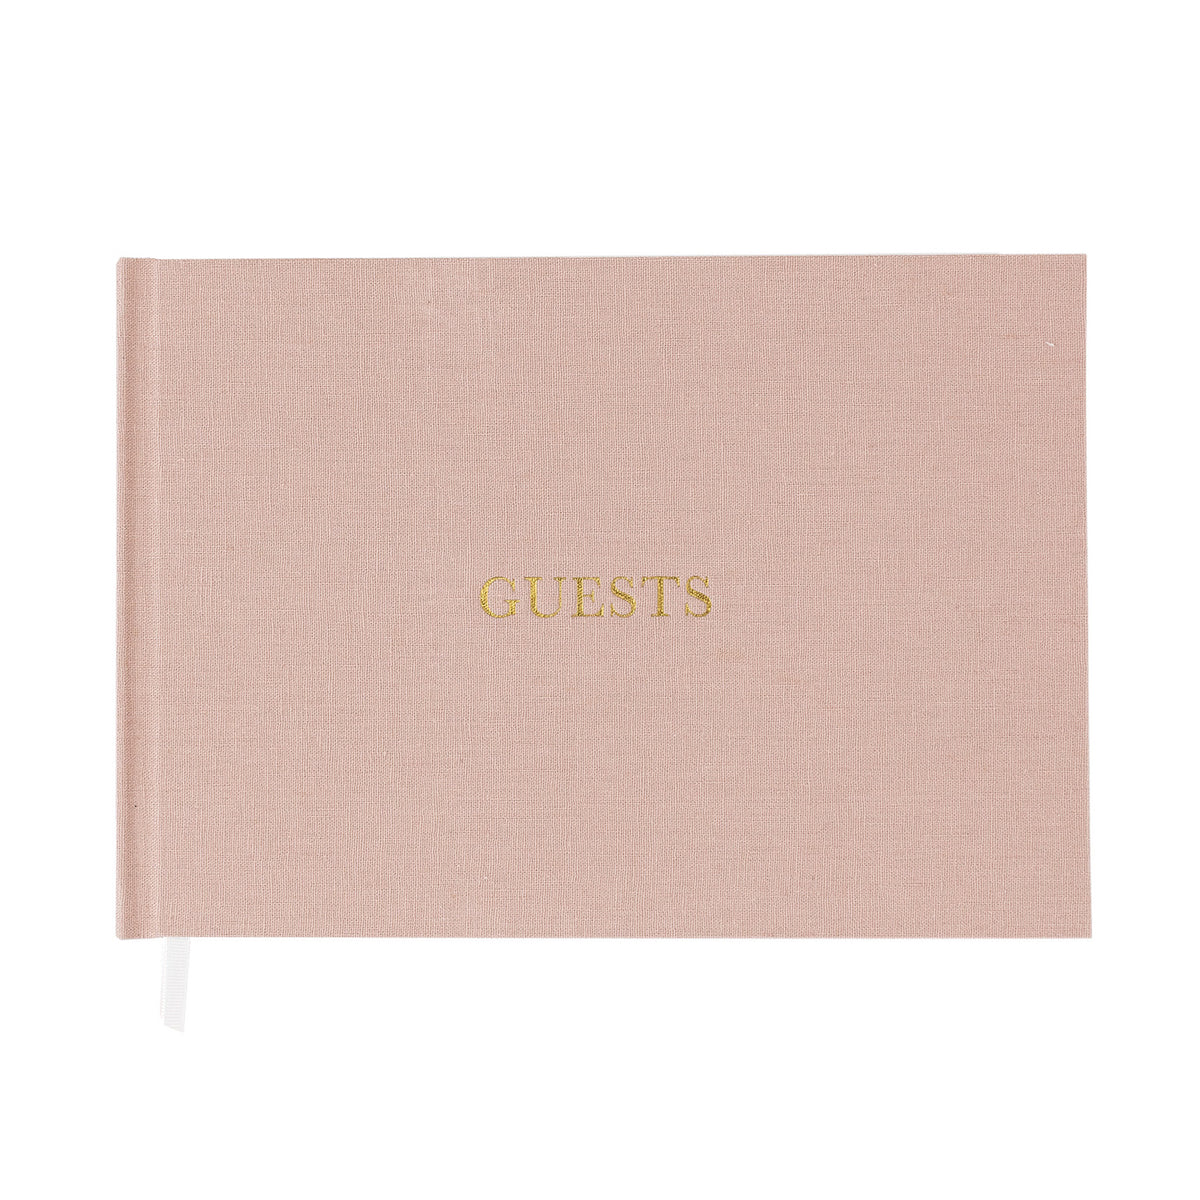 Rose Linen Wedding Guest Book stamped with gold foil "Guests" on the cover